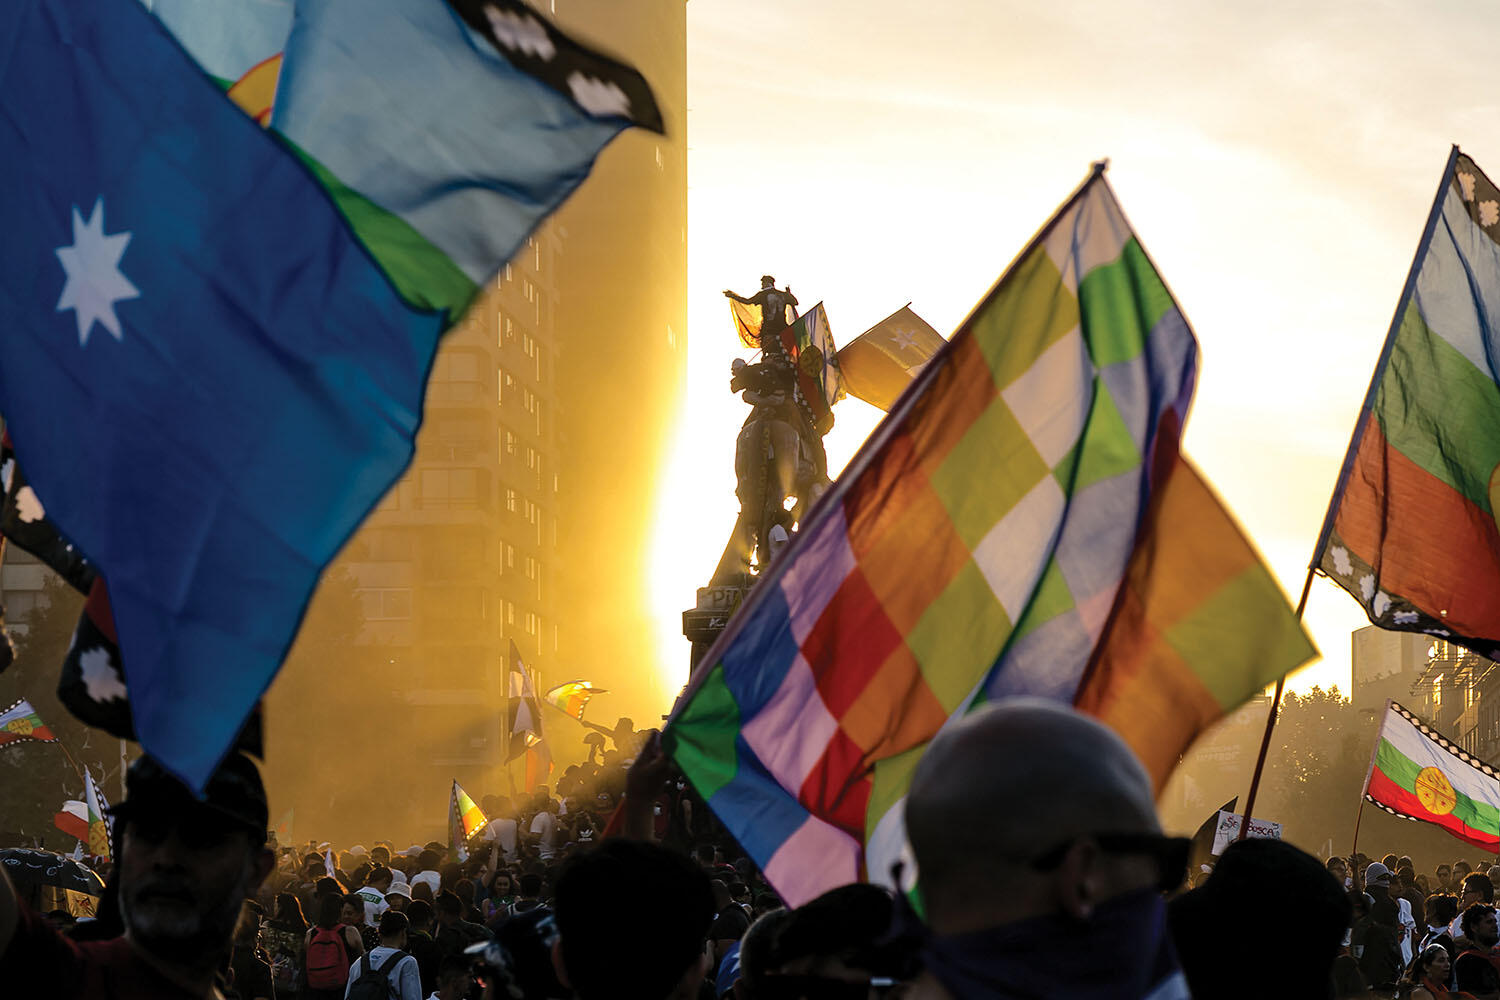 Flags representing Indigenous peoples fly over a protest in Santiago’s Plaza Baquedano, October 2019. (Photo by Matías Garrido Hollstein.)